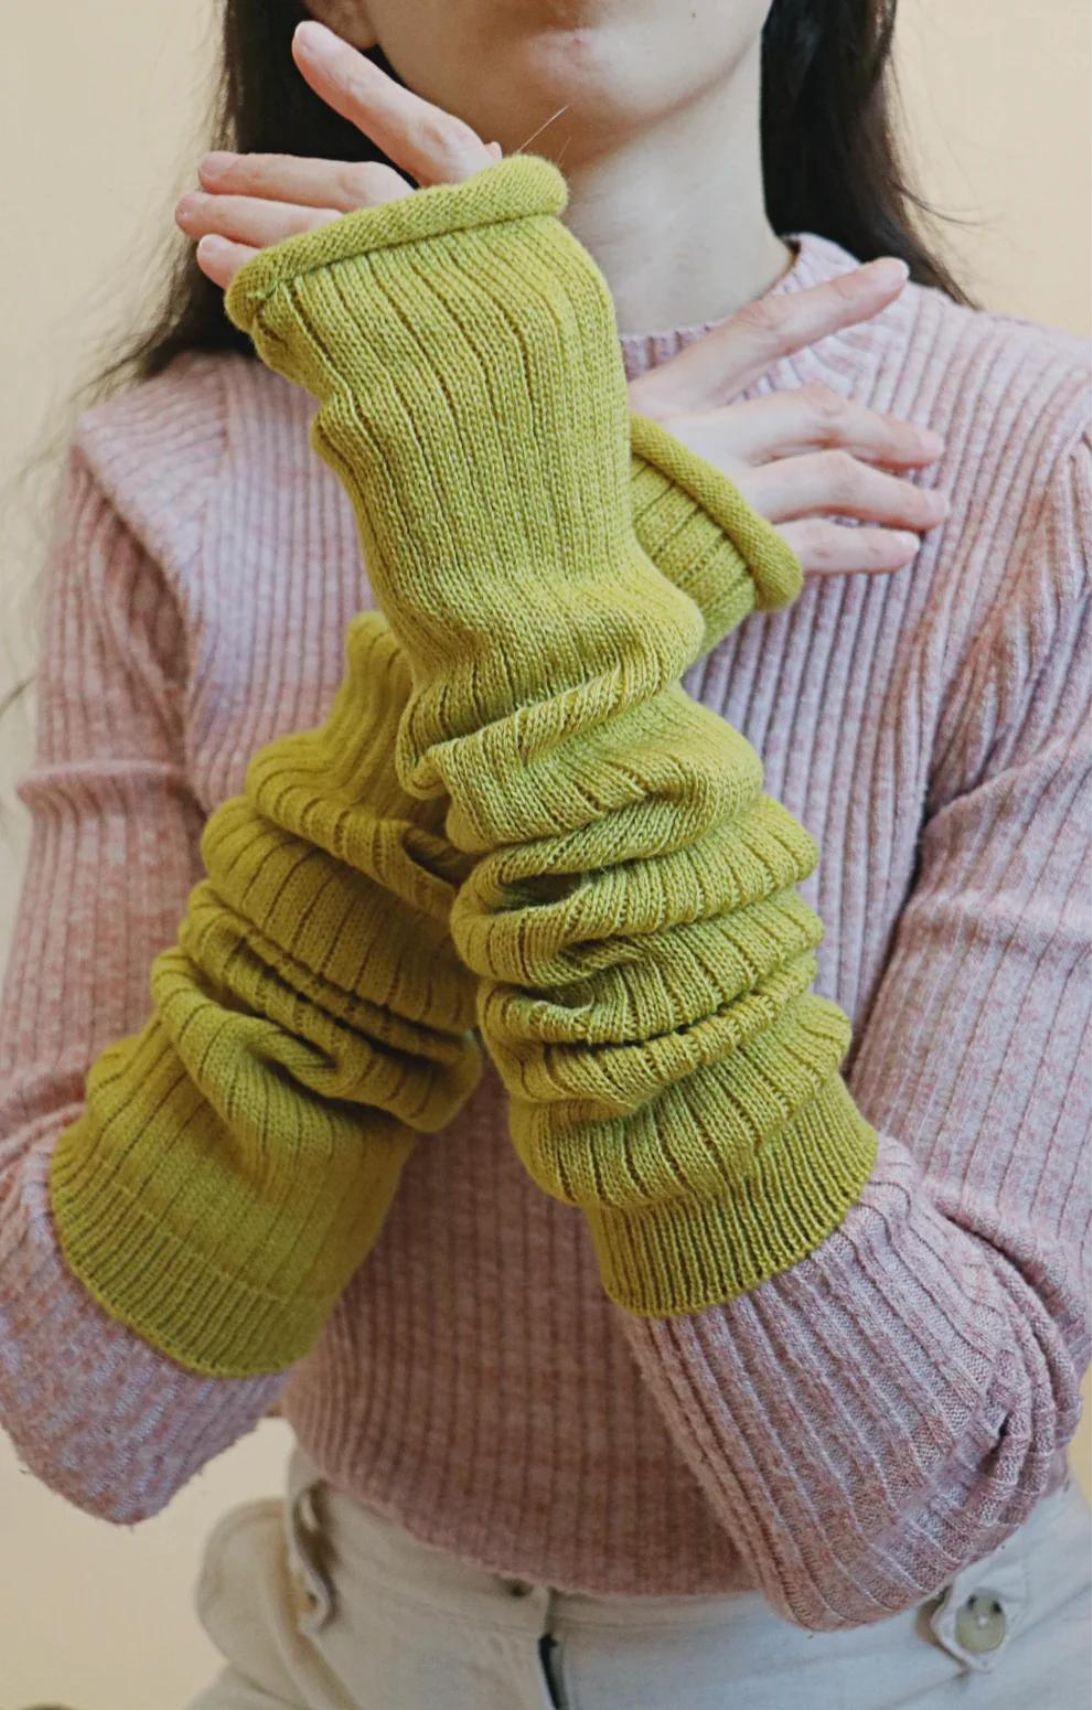 Arm of a woman wearing an ivory-colored sweater wearing the Bitter Yellow color of TABBISOCKS brand Wool Blend Leg and Arm Warmers